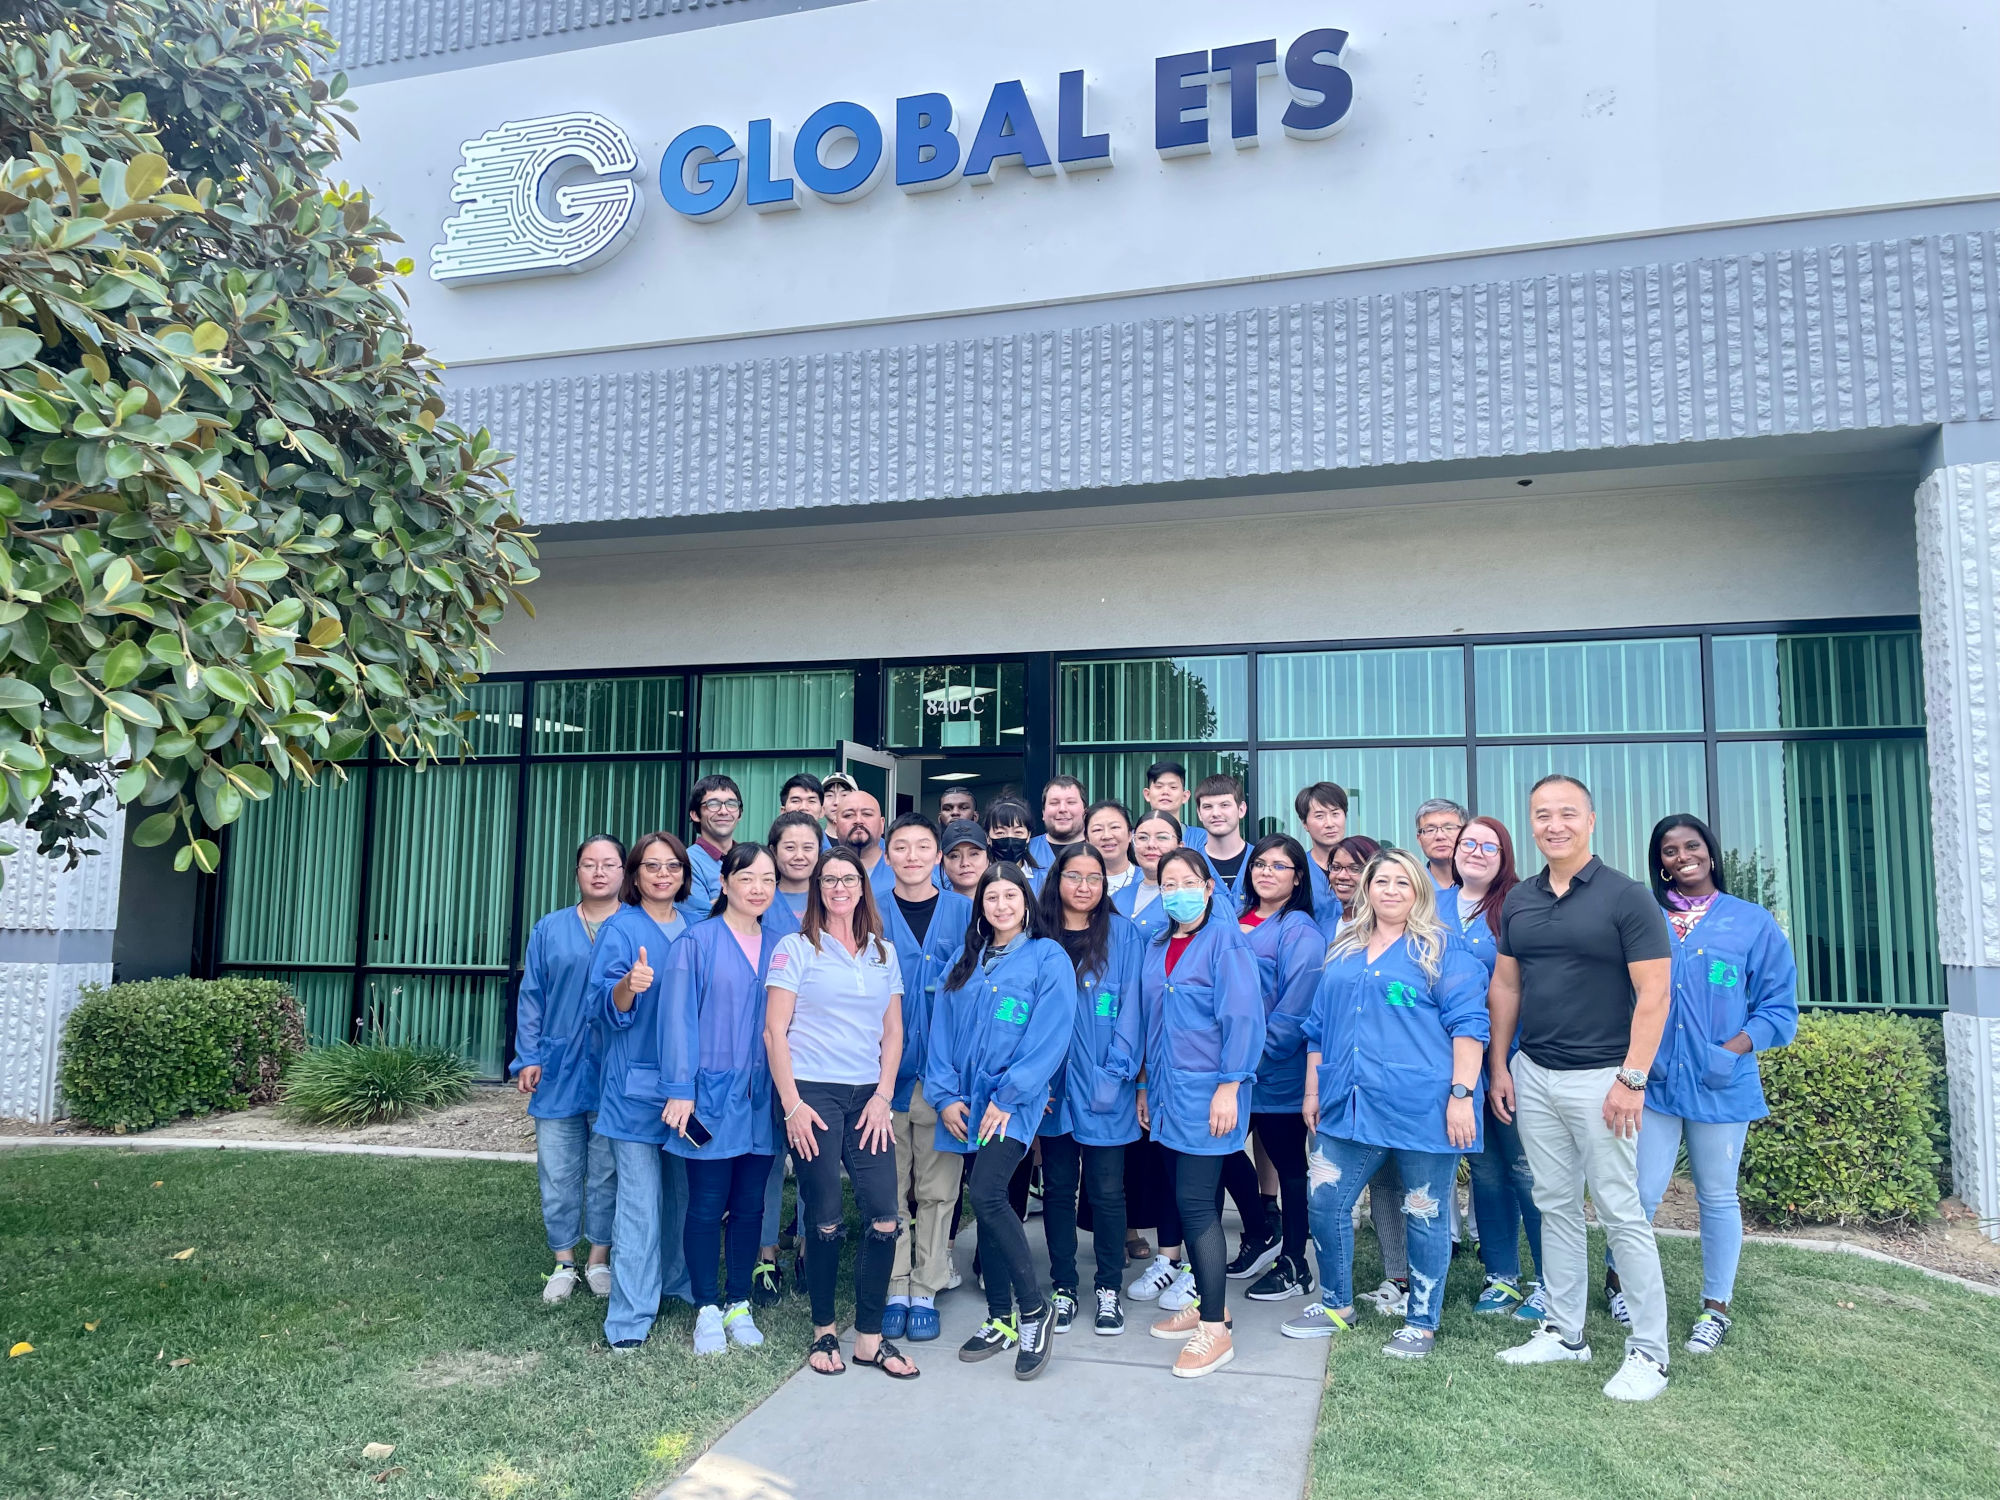 A group of Global ETS employees wearing blue lab coats outside in front of a building with a sign that reads 'GLOBAL ETS.' They are gathered on a lawn next to a bush and in front of windows with vertical blinds.